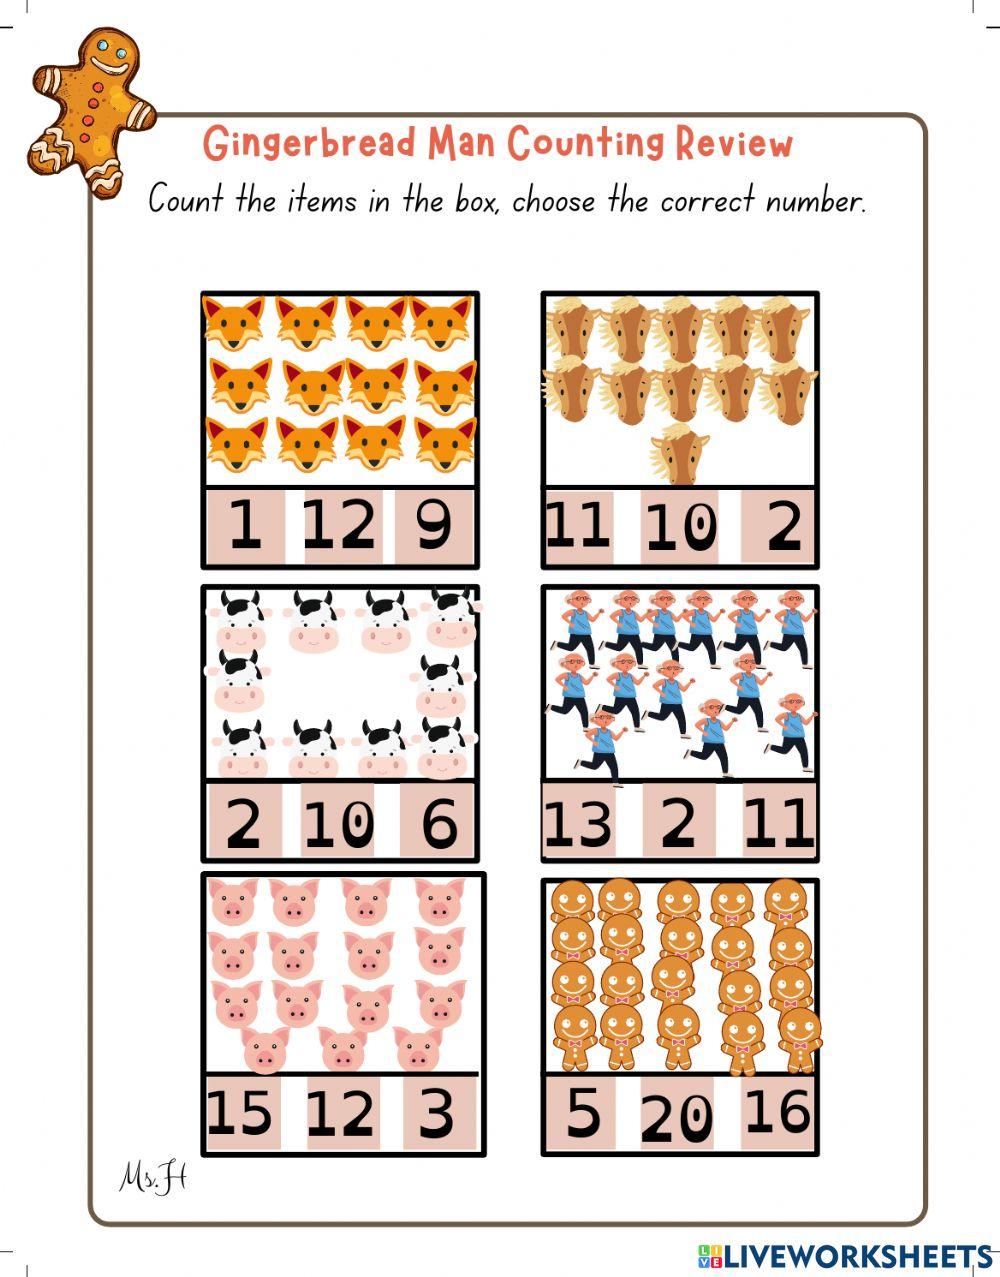 Counting 11-20 - Gingerbread Man